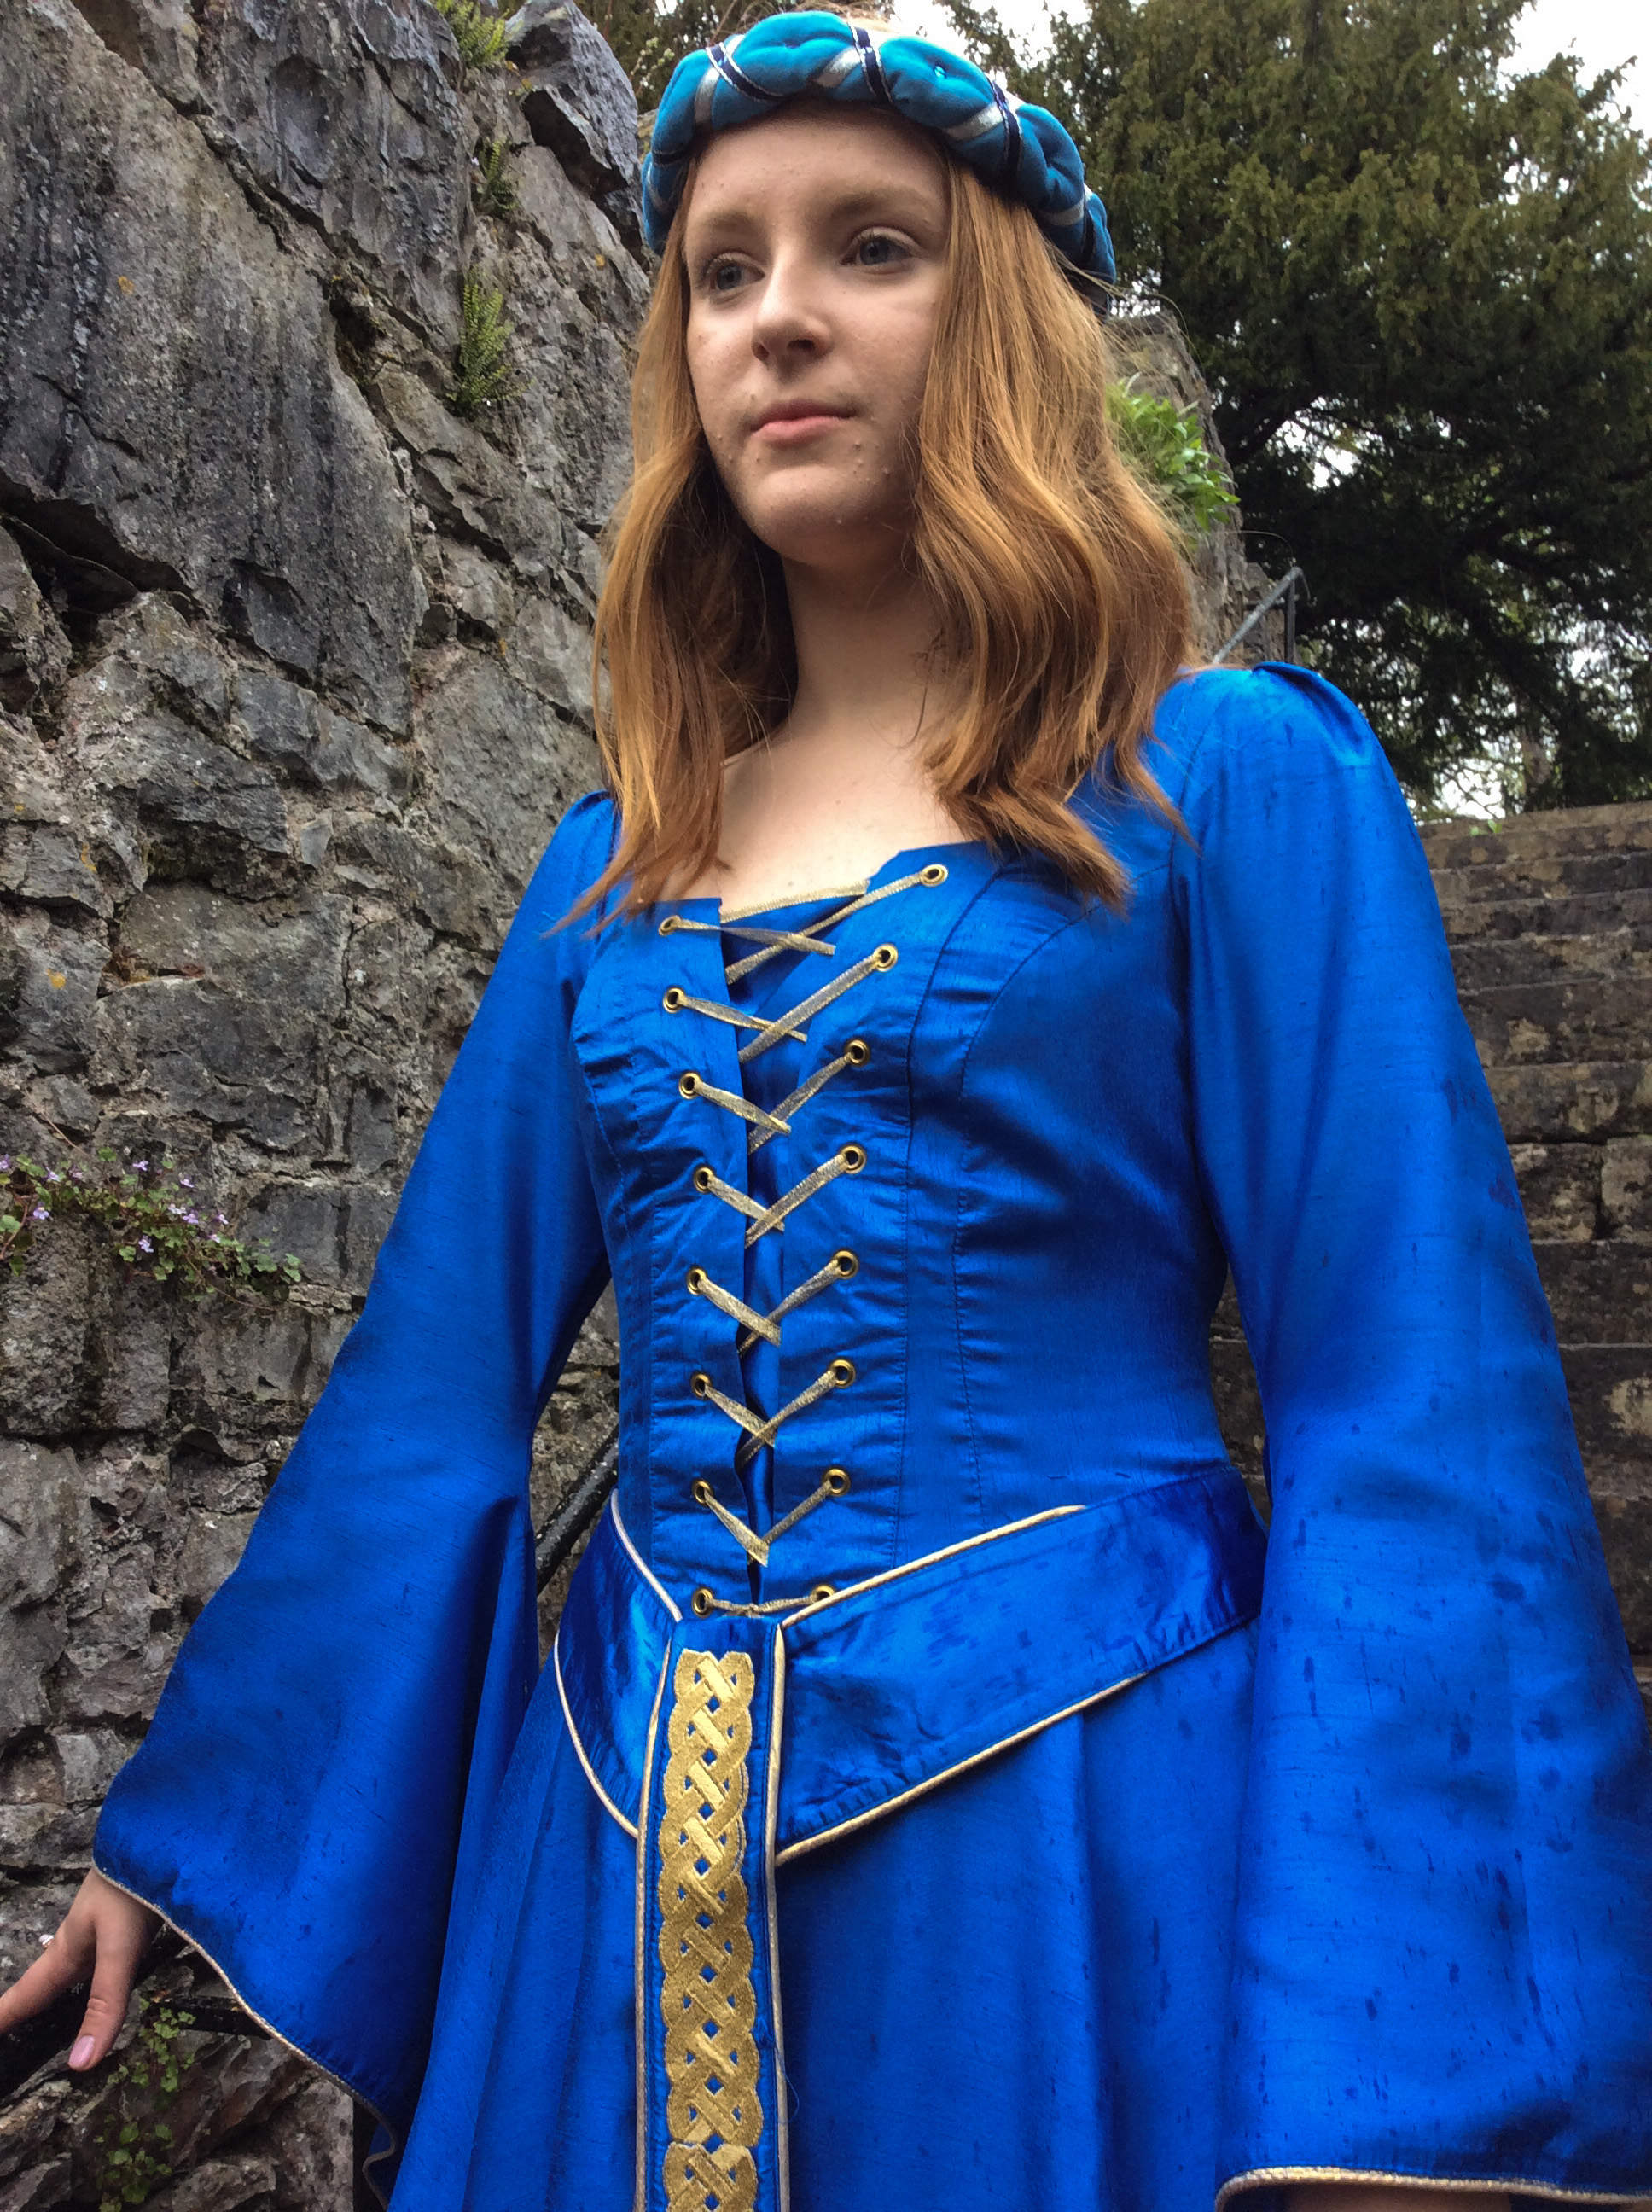 Electric blue medieval dress to hire with bell sleeves and gold lacing